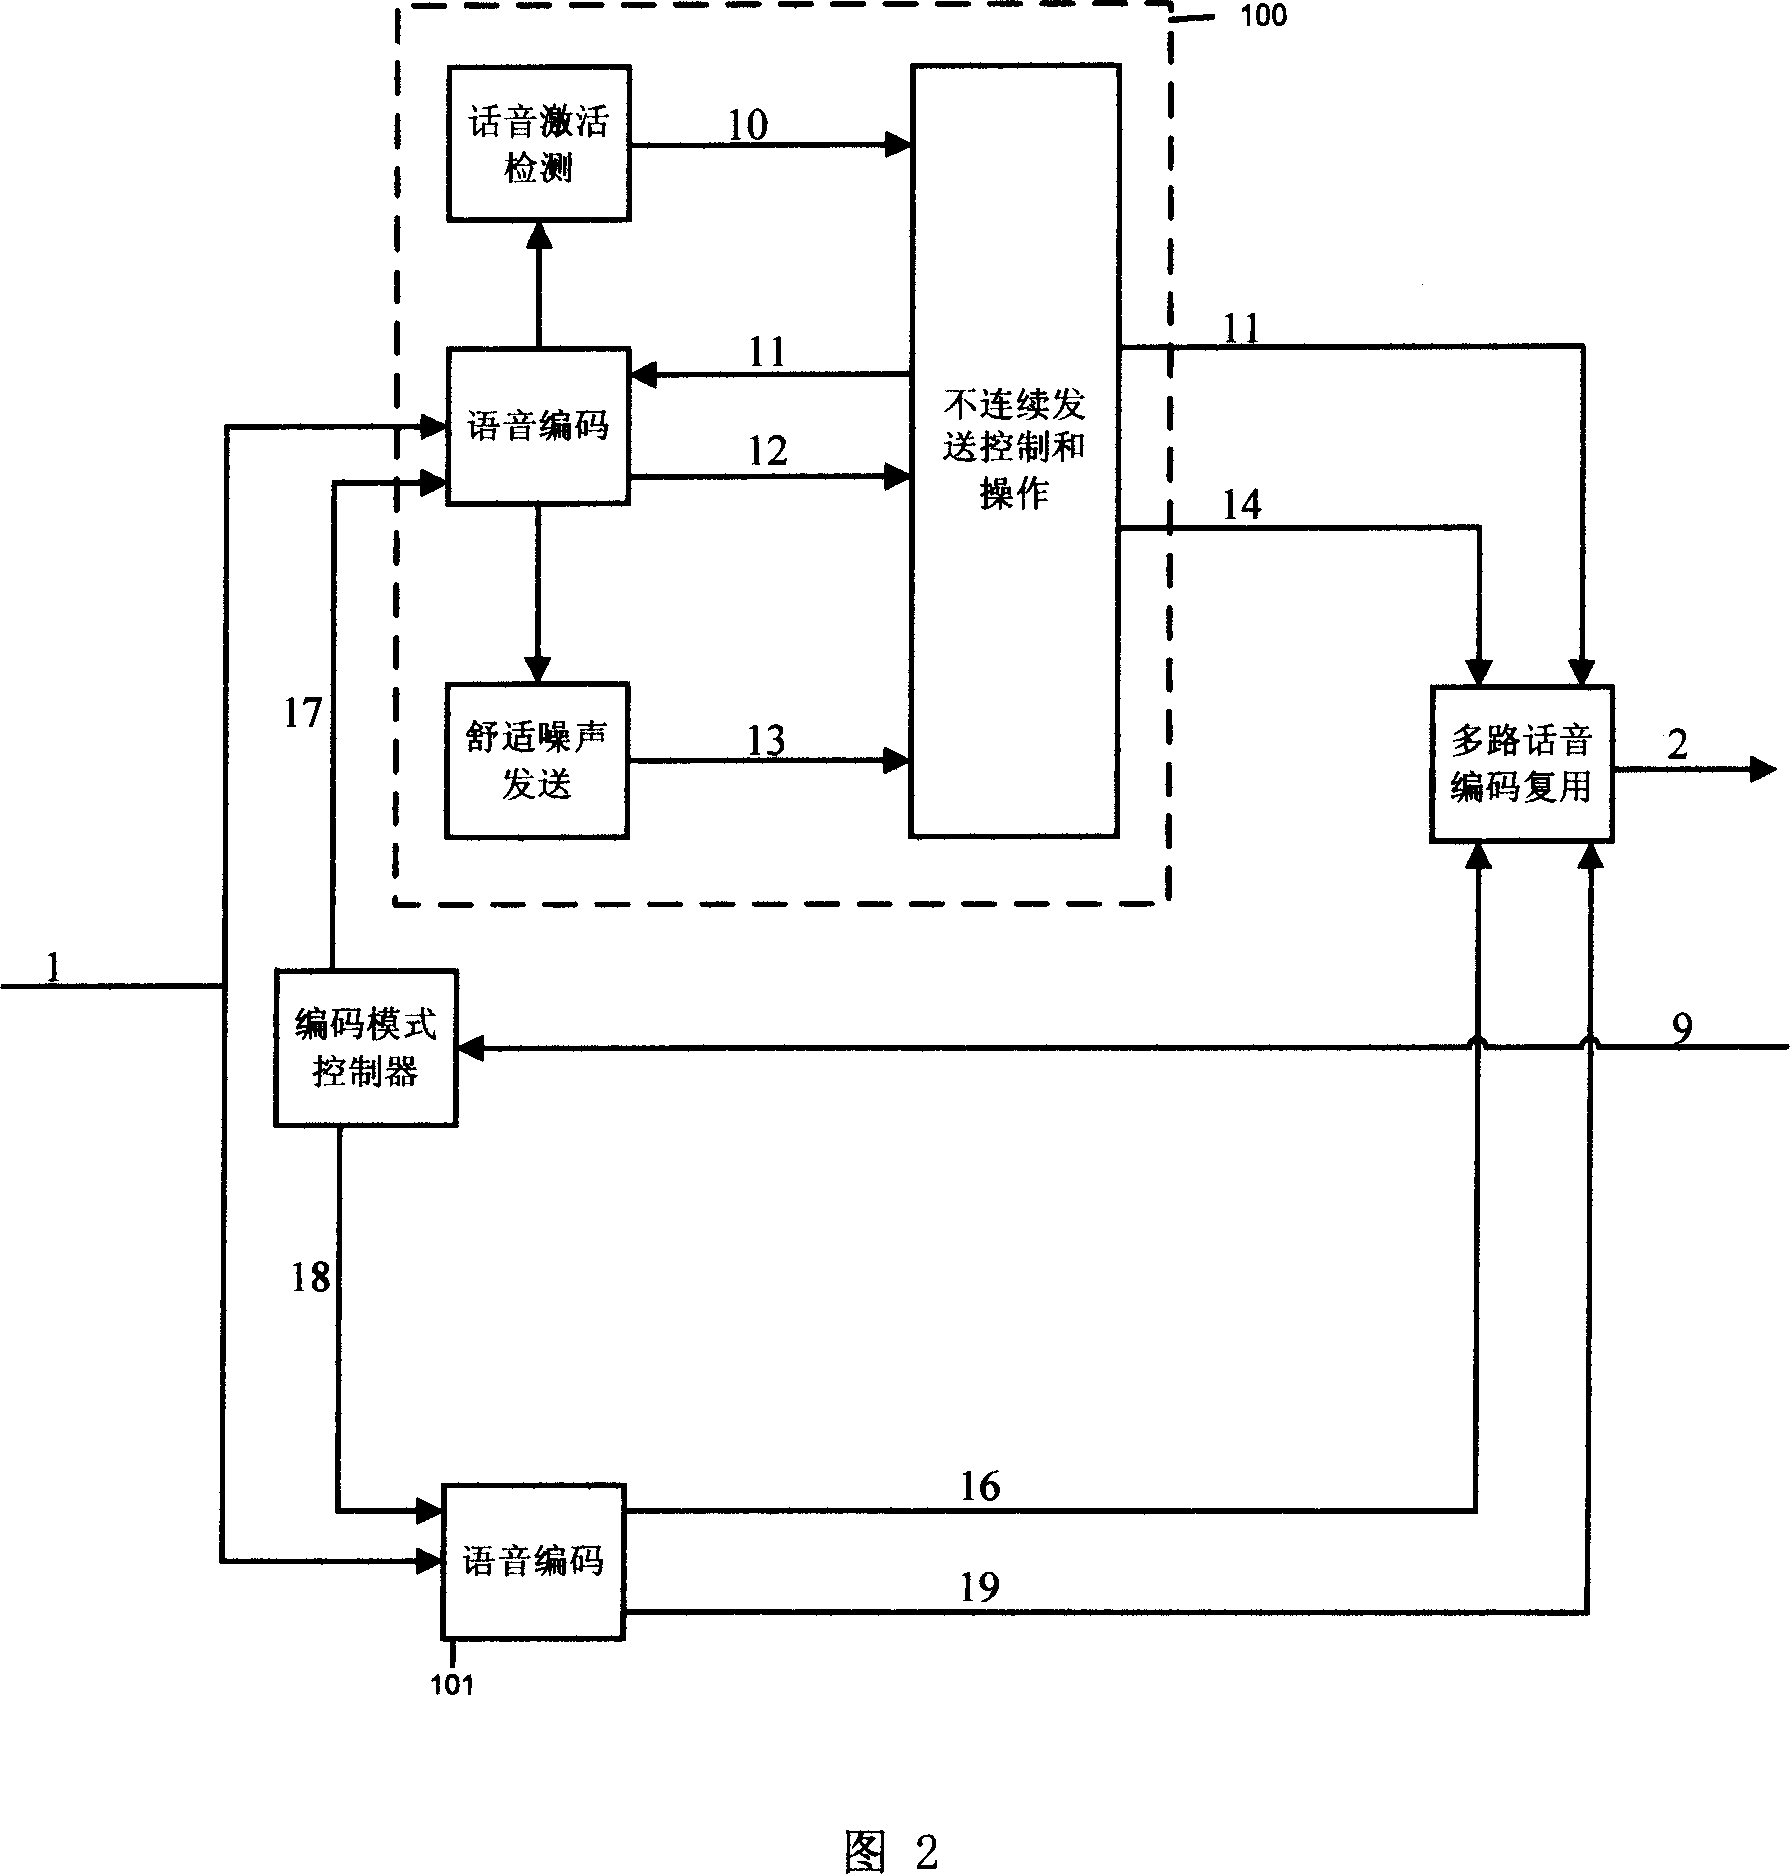 Self adaptive multiple rate encoding and transmission method for voice